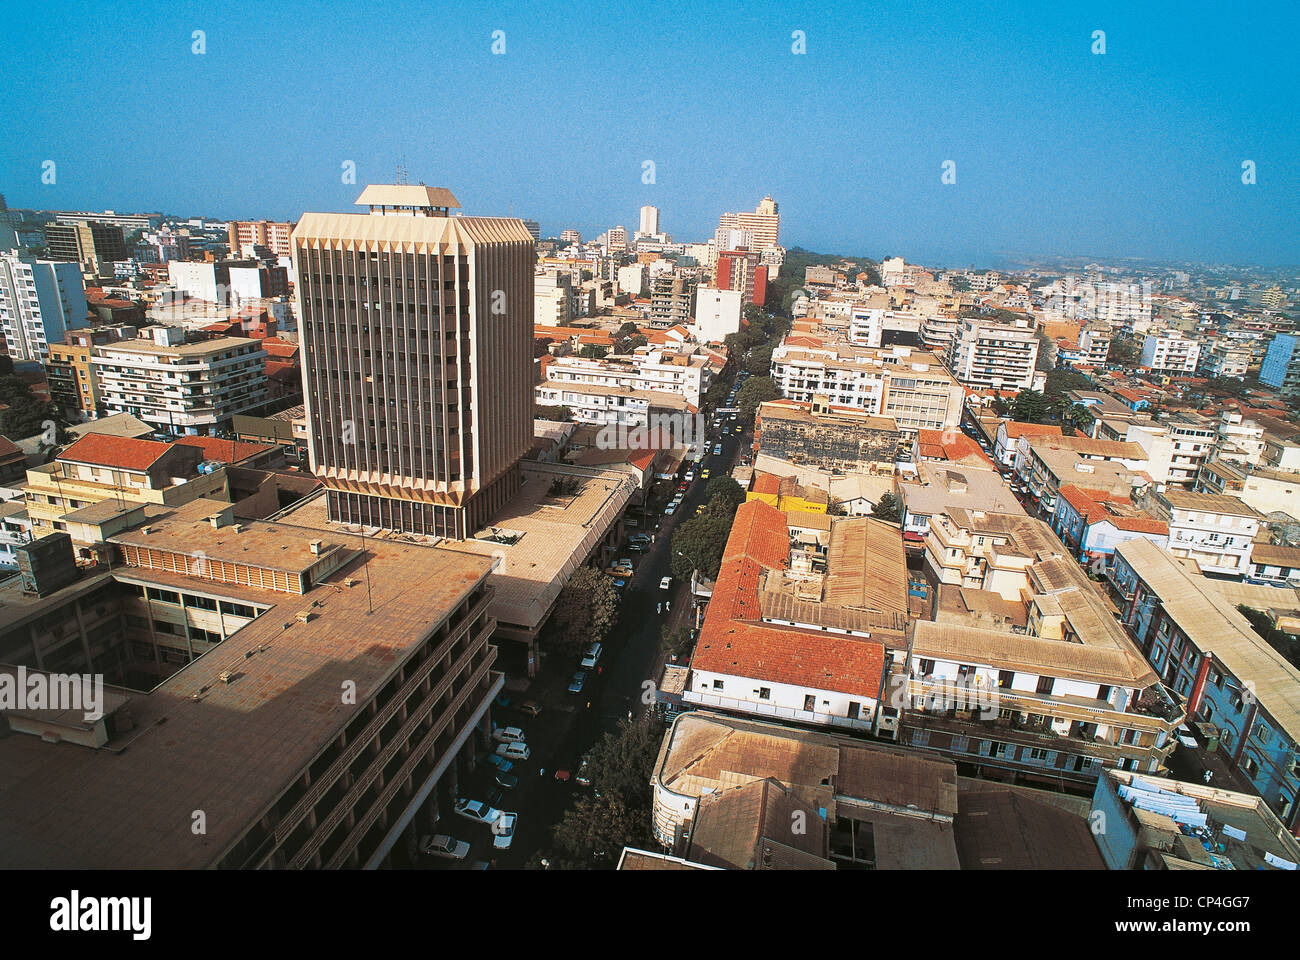 Senegal - Dakar. View of the city from the terrace of the Hotel de